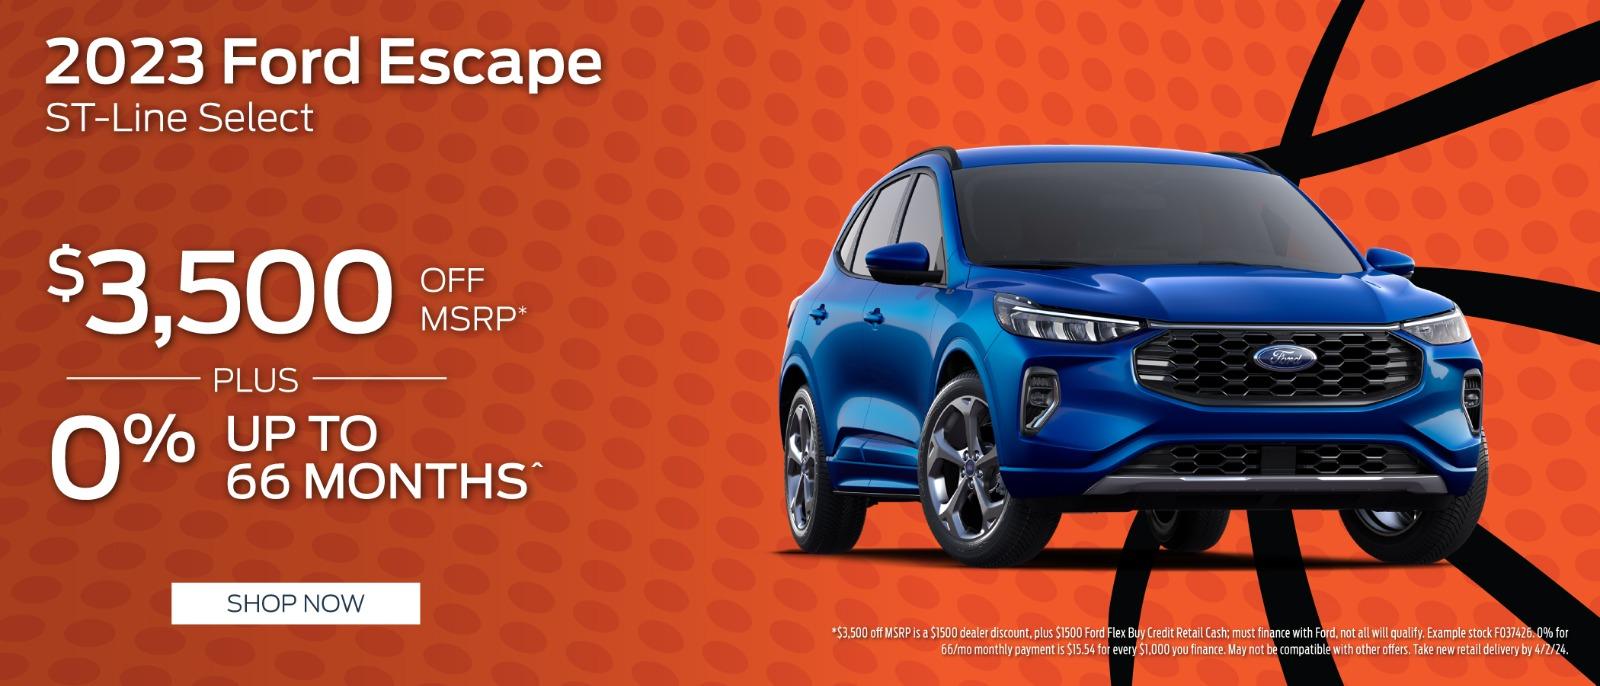 2023 Ford Escape $3,500 off MSRP plus 0%up to 66 months